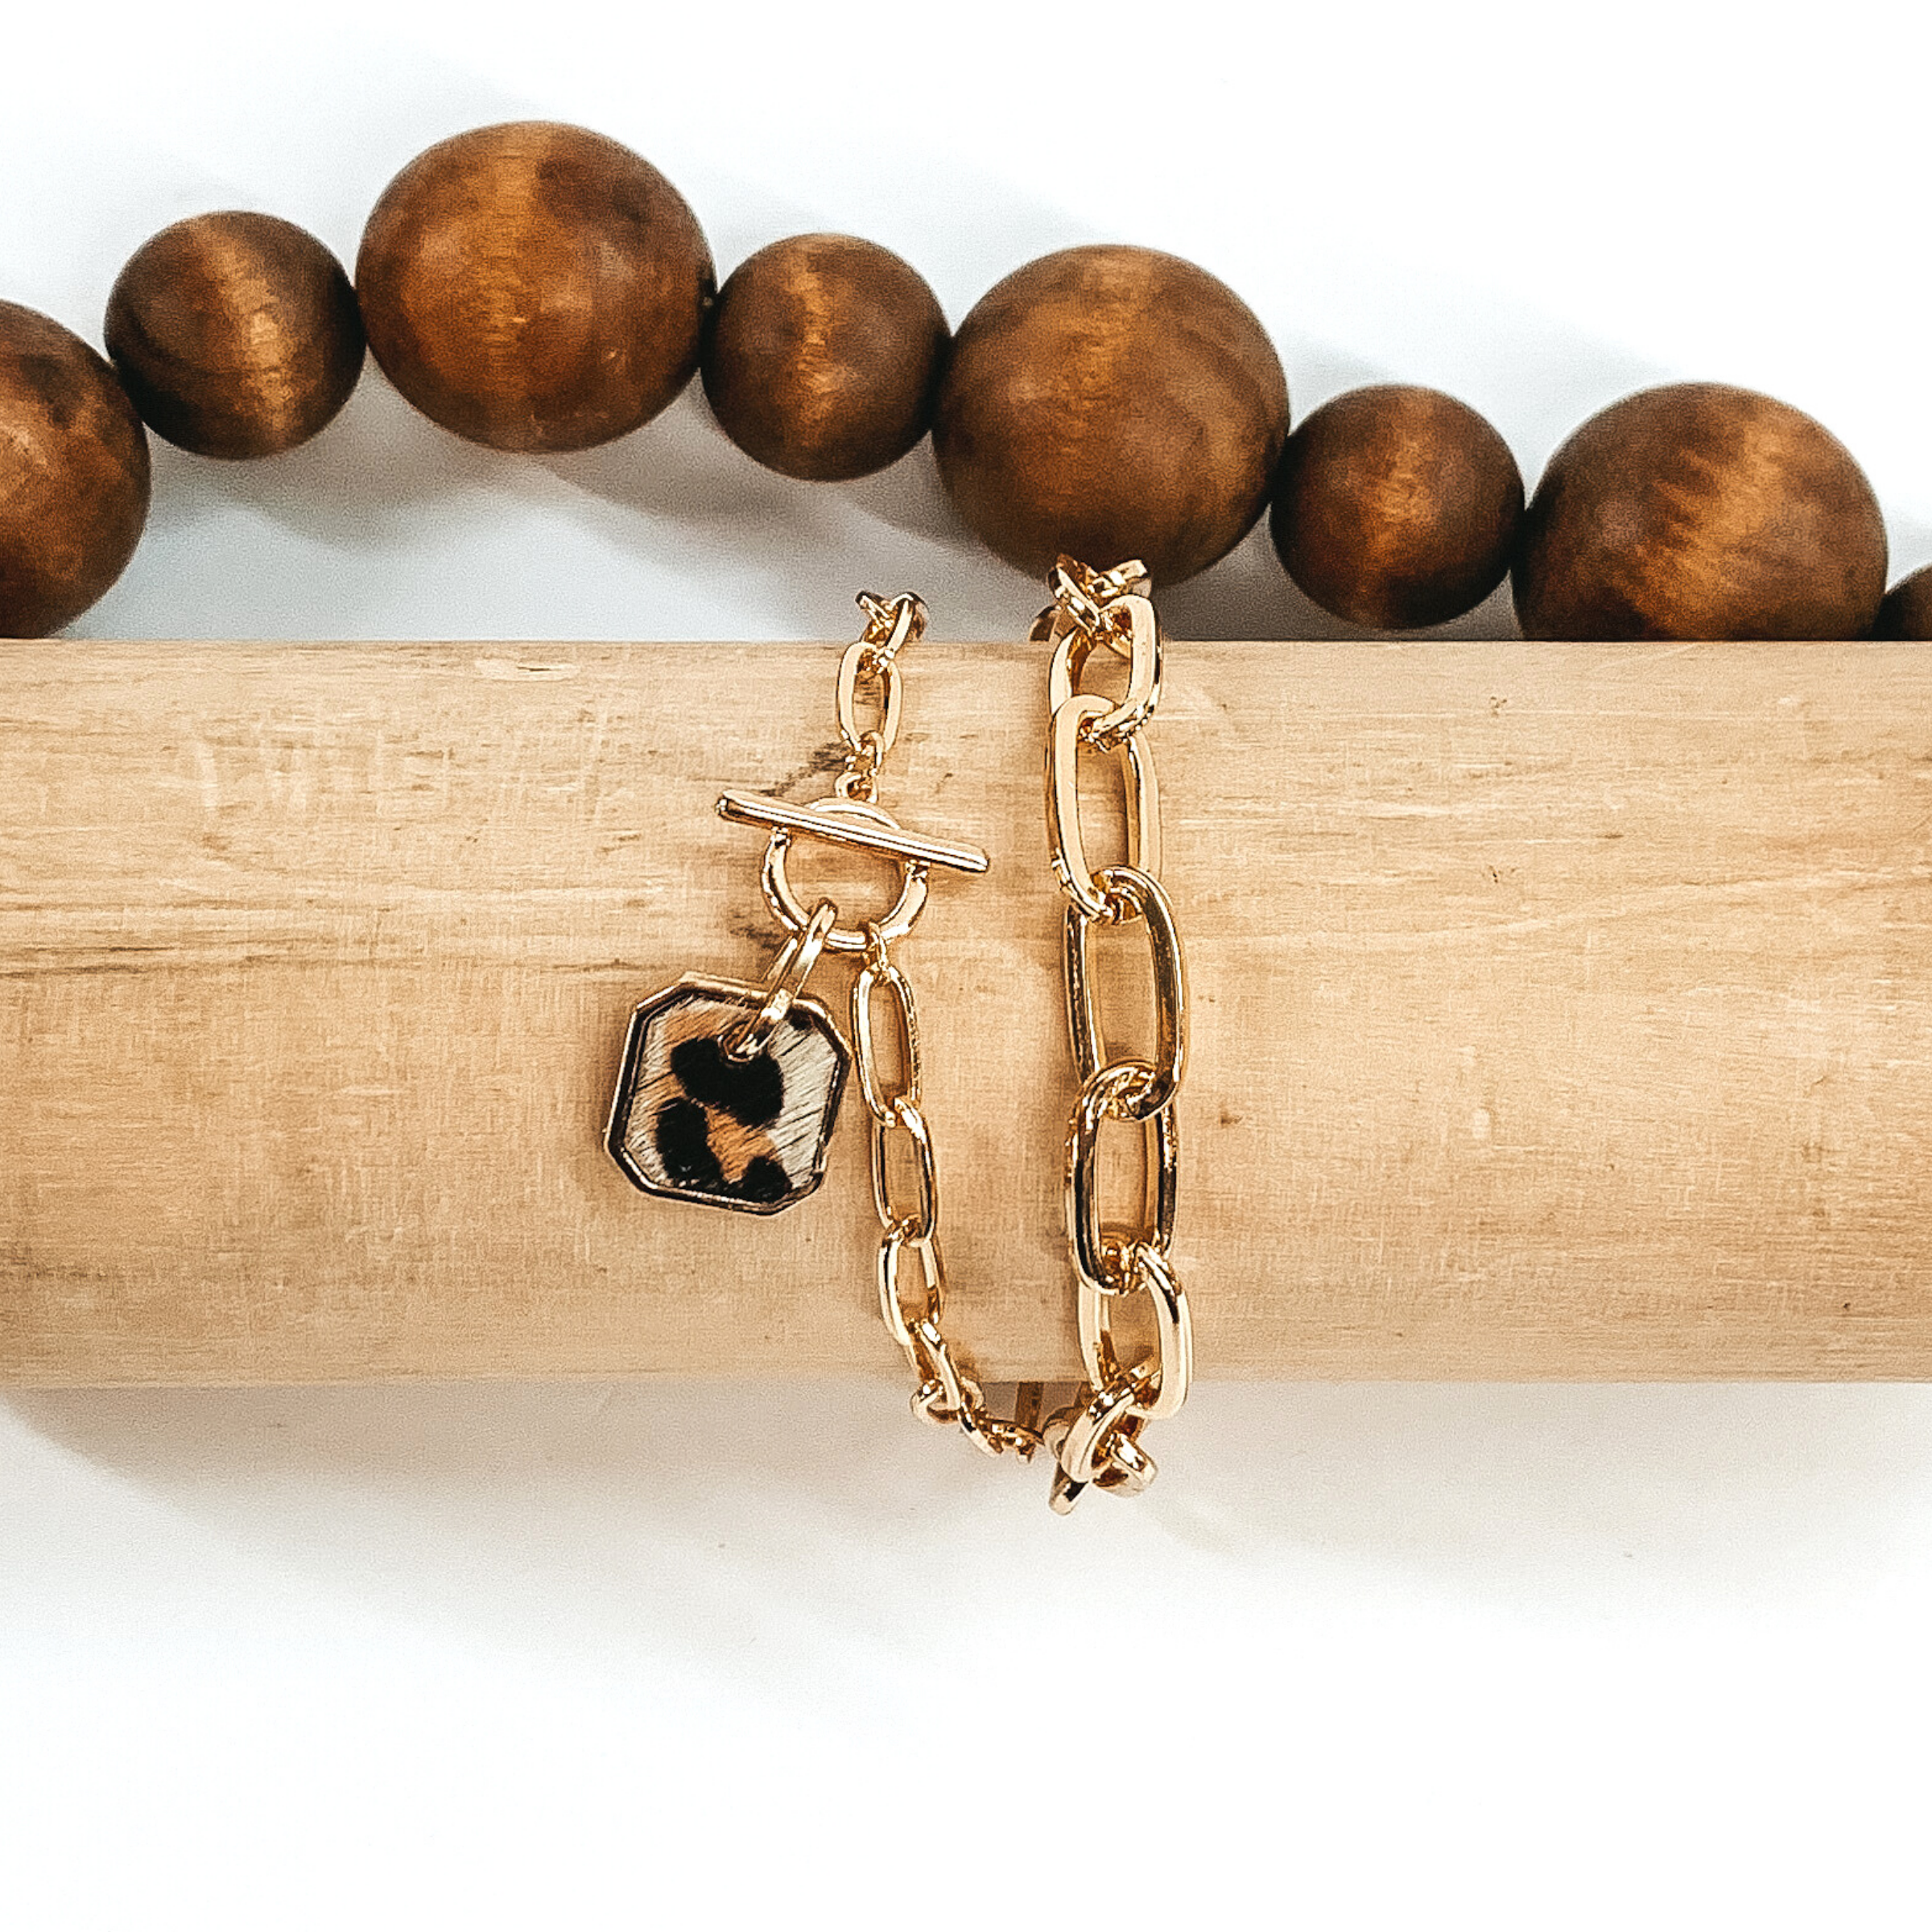 Gold two chained bracelet with an octagon pendant with a white hide inlay with a black and brown animal print. This bracelet is pictured on a light tan bracelet holder on a white background with brown beads in the background. 